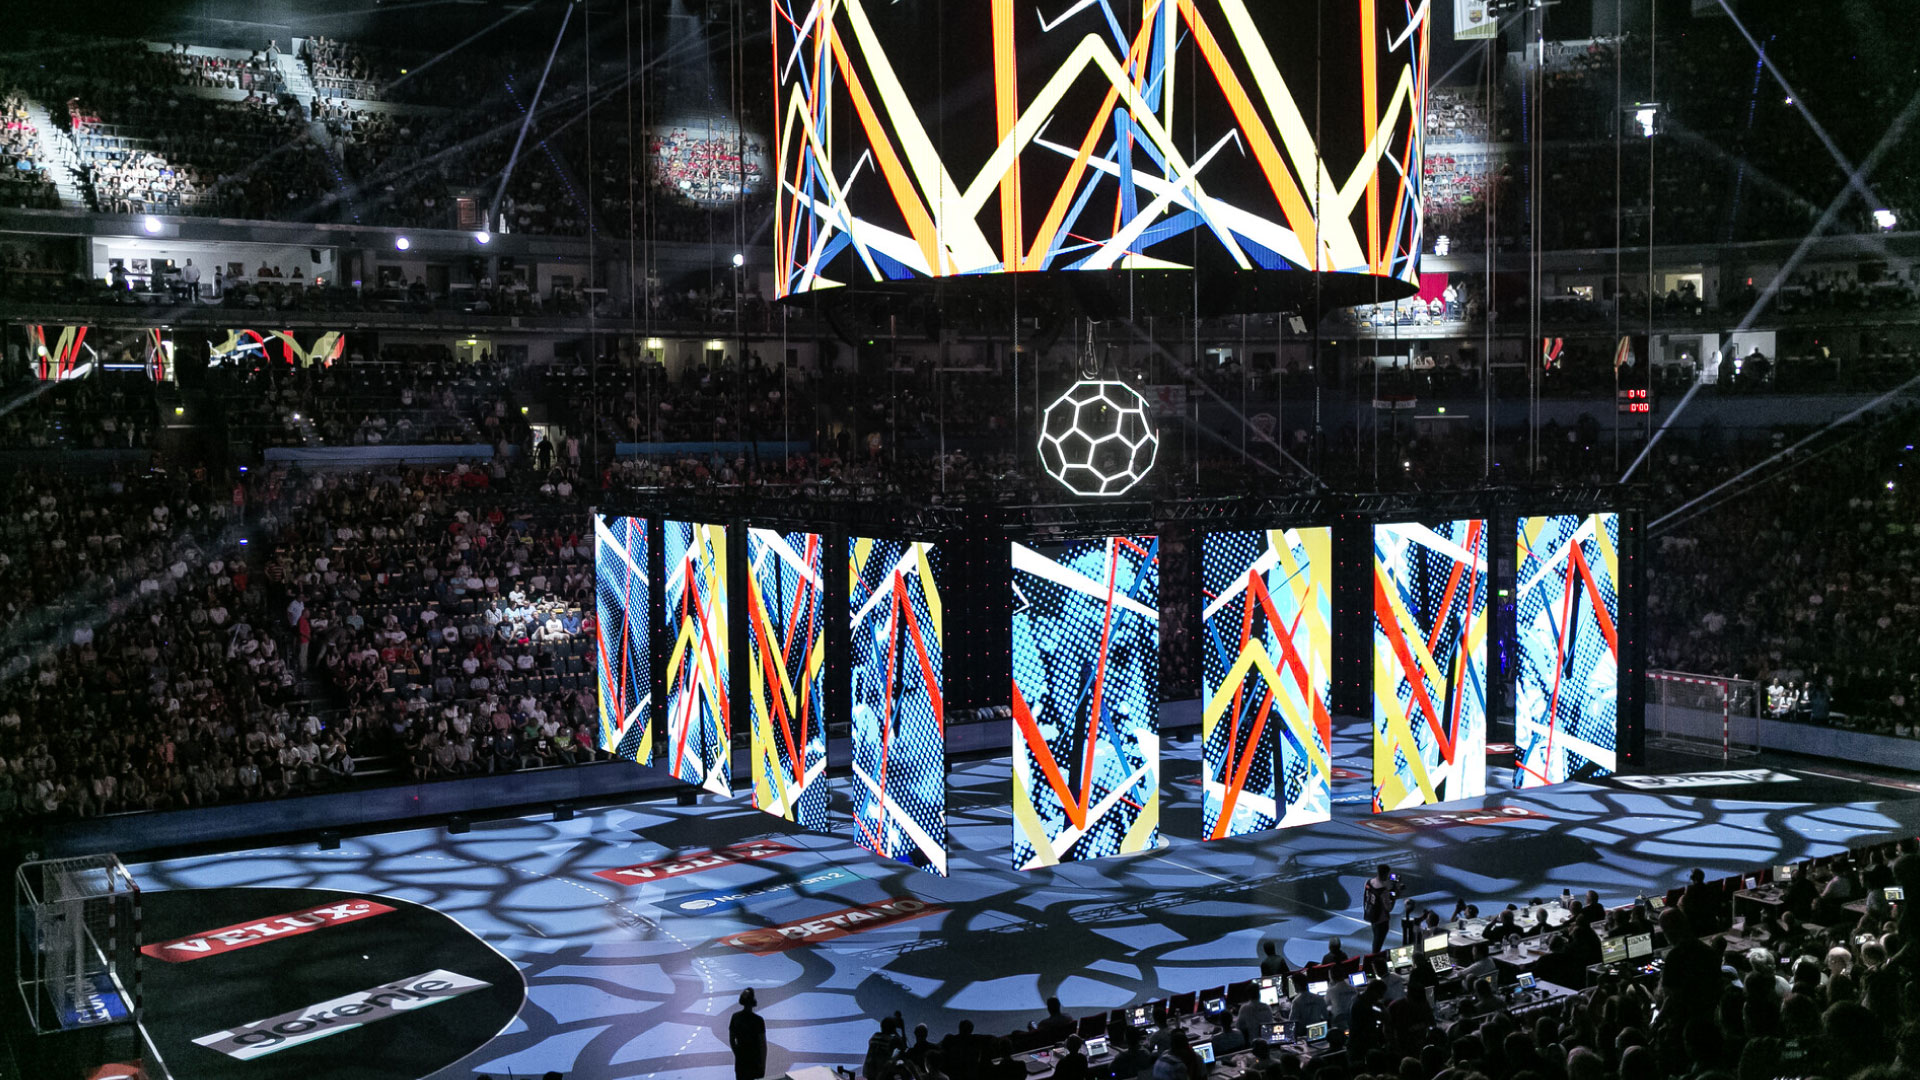 Final of the European Handball Champions League, held in Cologne, Lanxess Arena. PRG delivered LED Screens for this event.